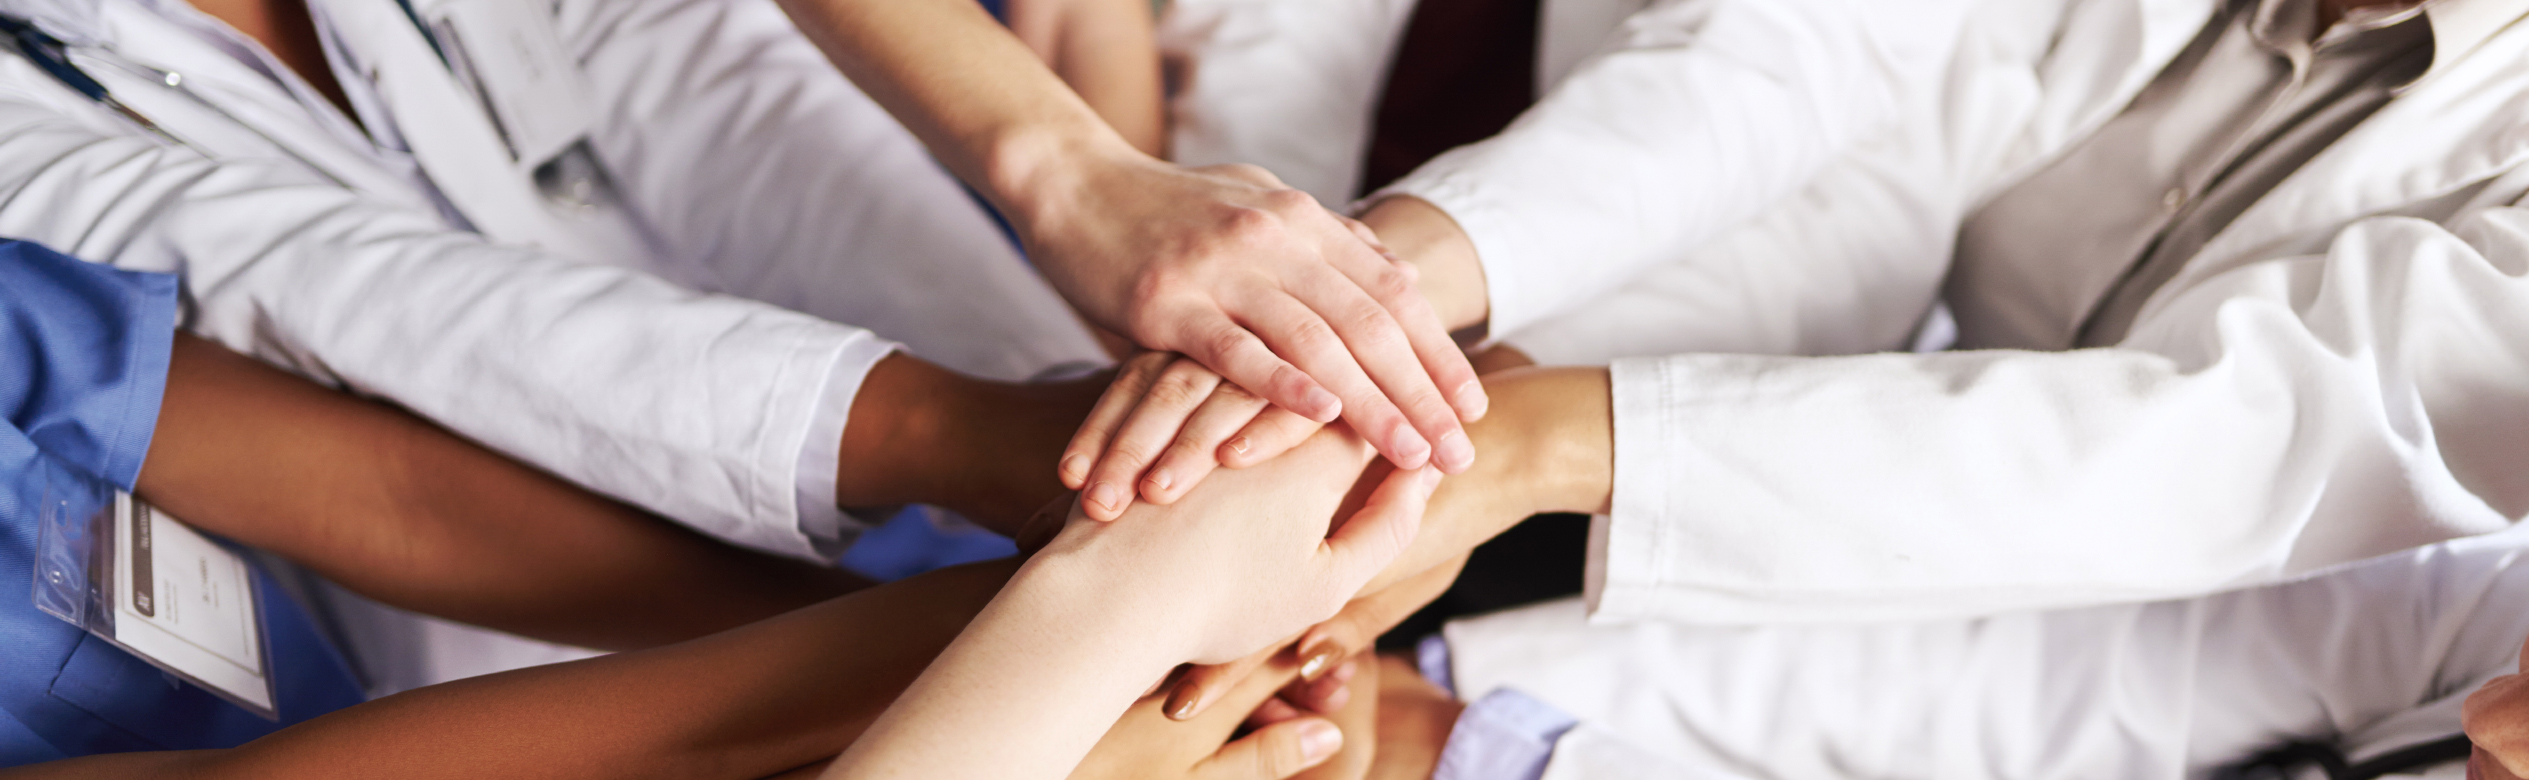 High angle shot of a group of medical practitioners joining their hands together in a huddle